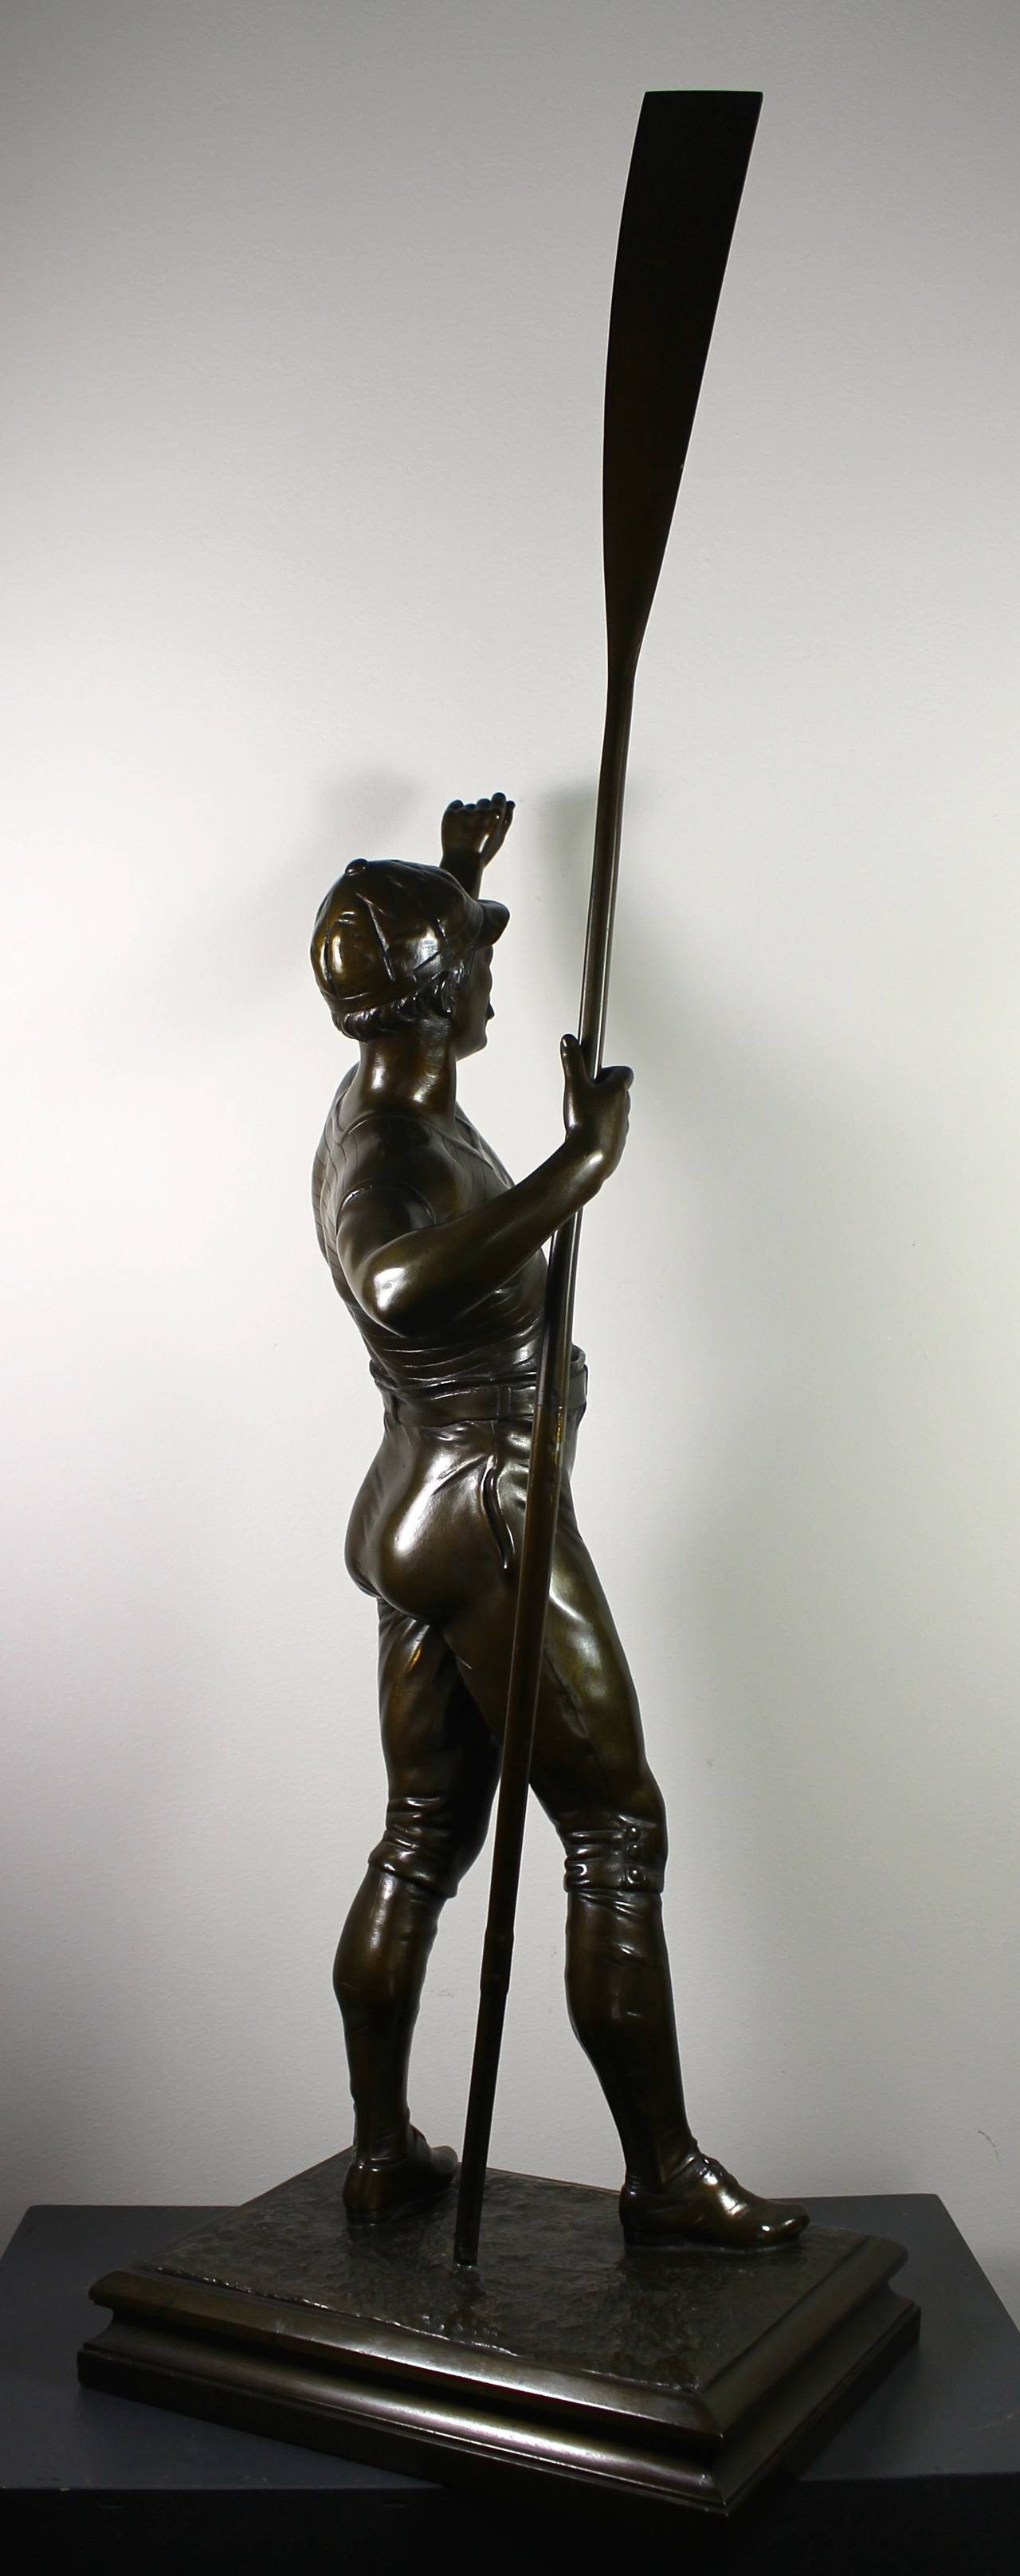 Hand-Crafted Bronzed Rower Sculpture, English circa 1910